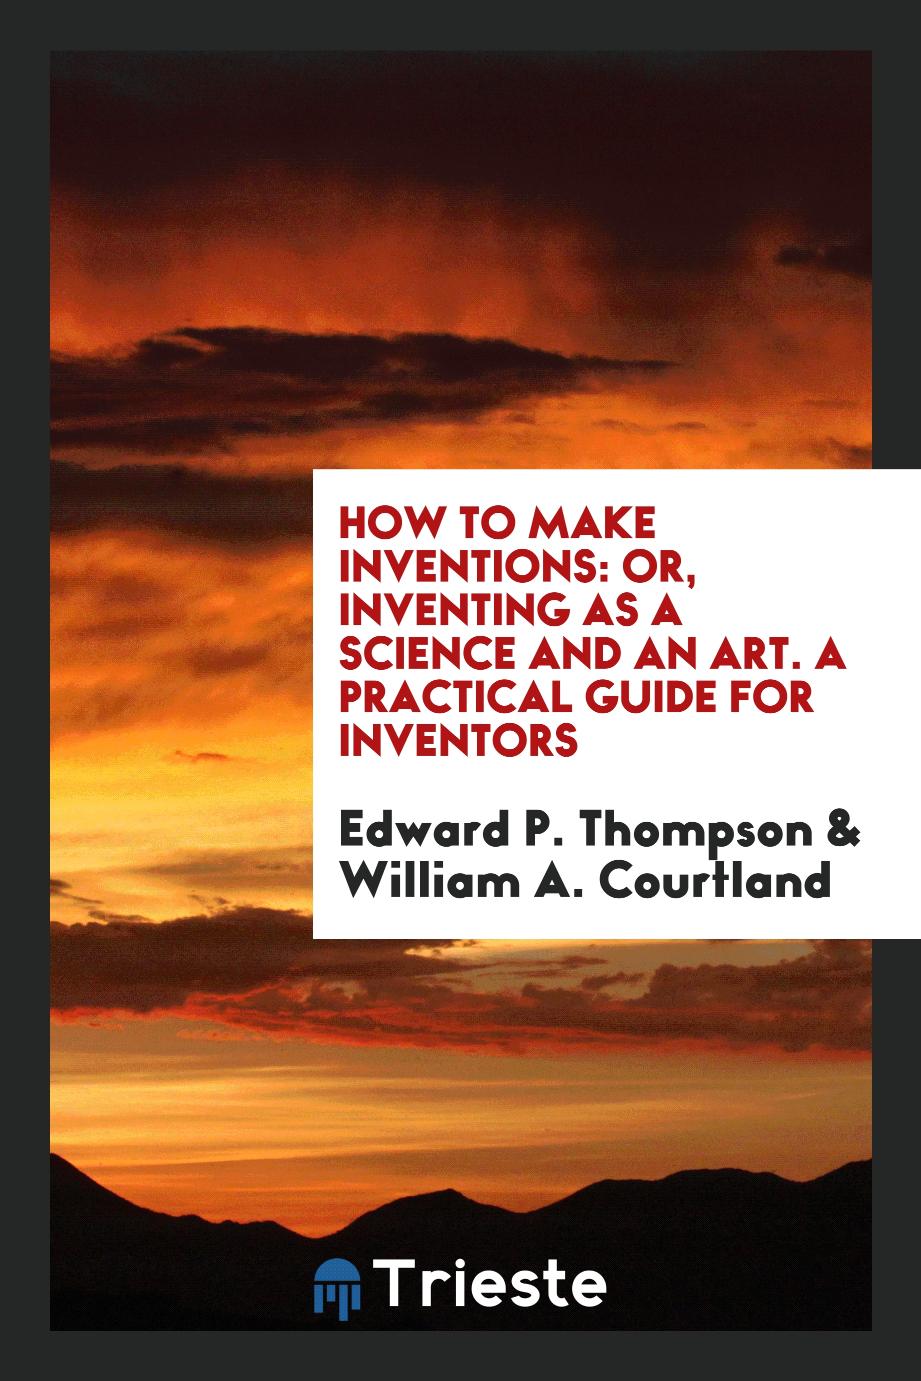 How to Make Inventions: Or, Inventing as a Science and an Art. A practical Guide for Inventors